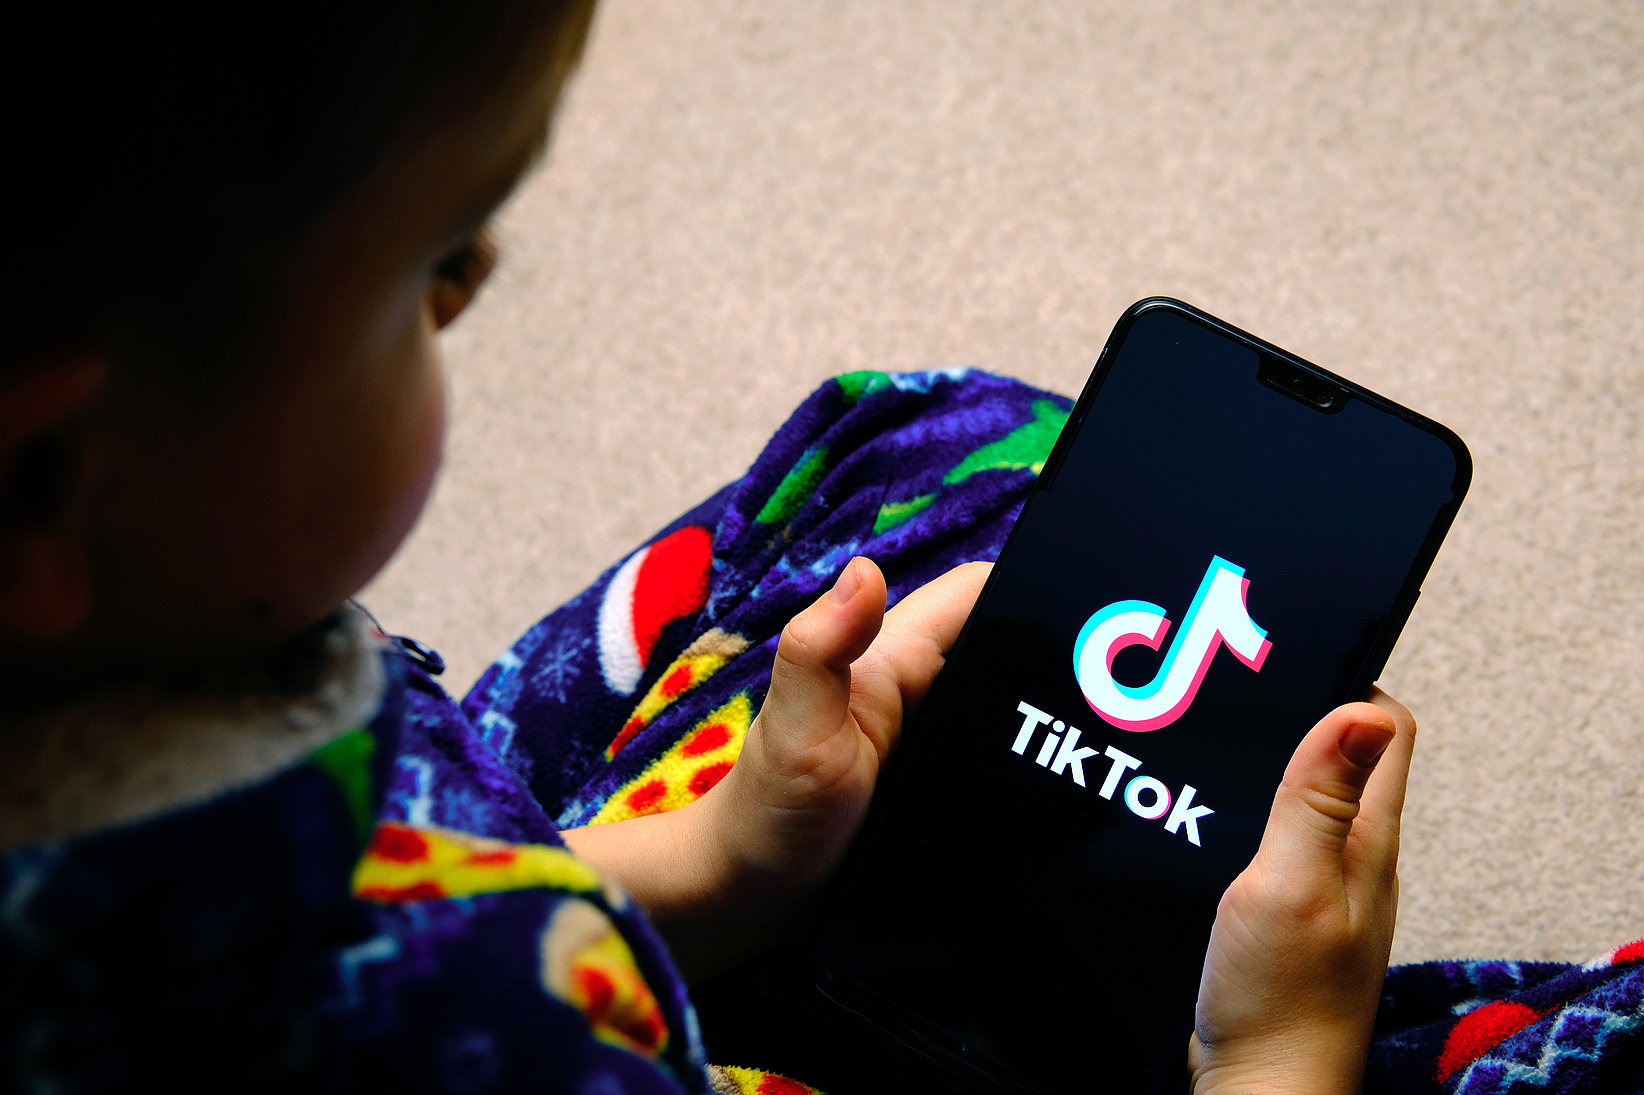 A mobile phone is held in the hand of a little boy, where "TikTok" can be seen on the screenshot.